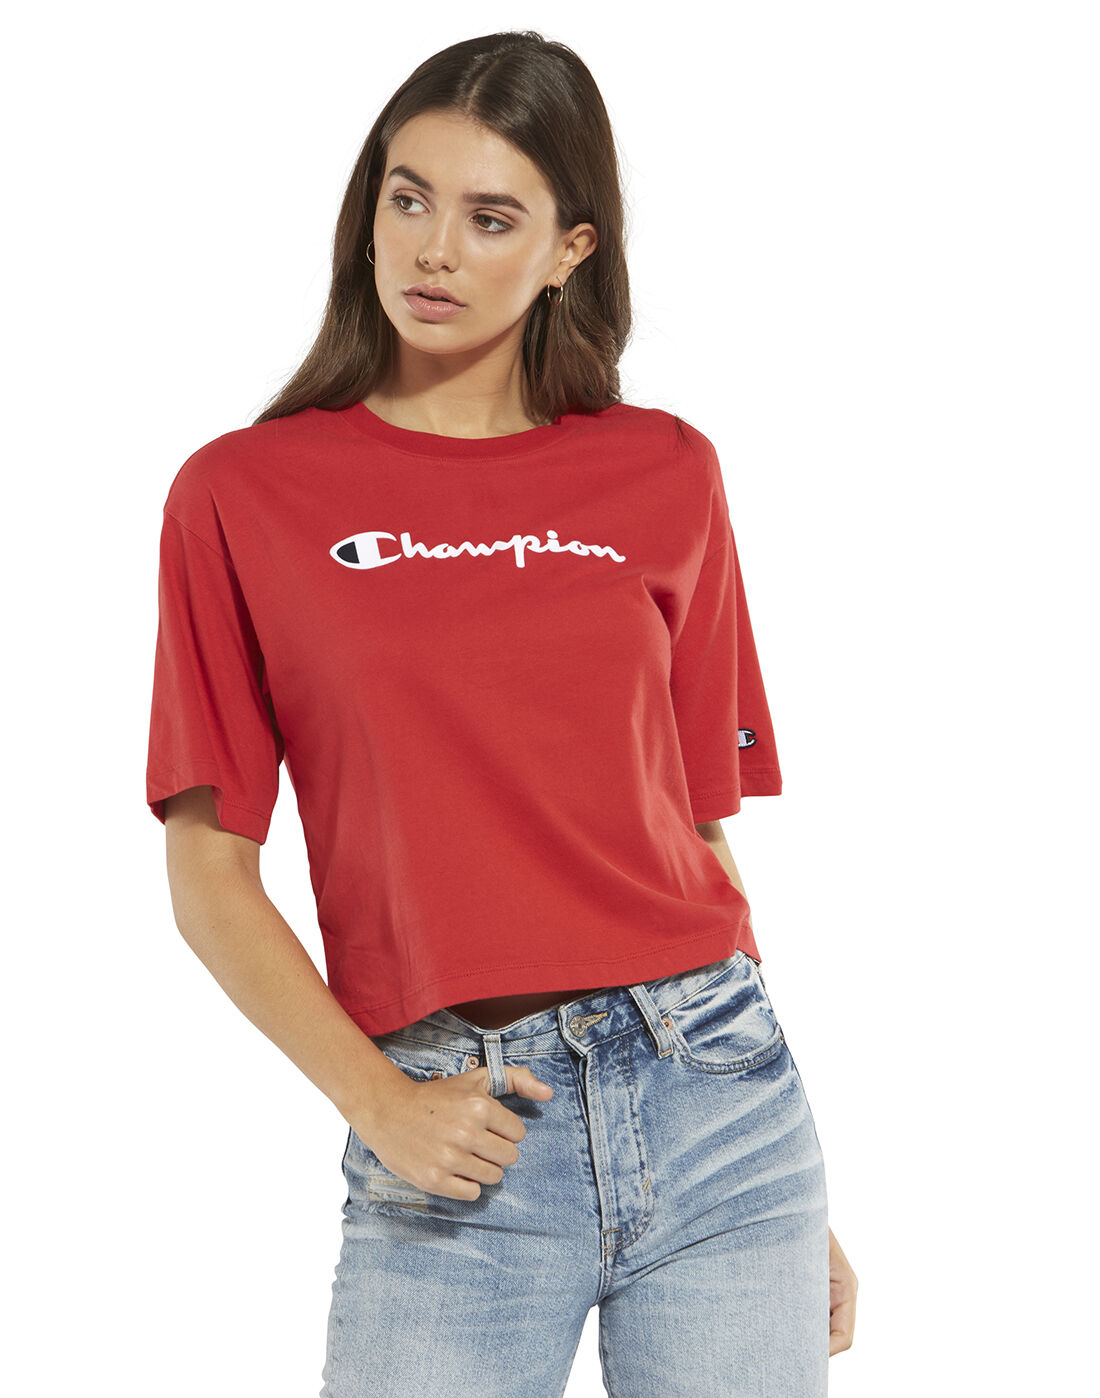 red tshirt for women